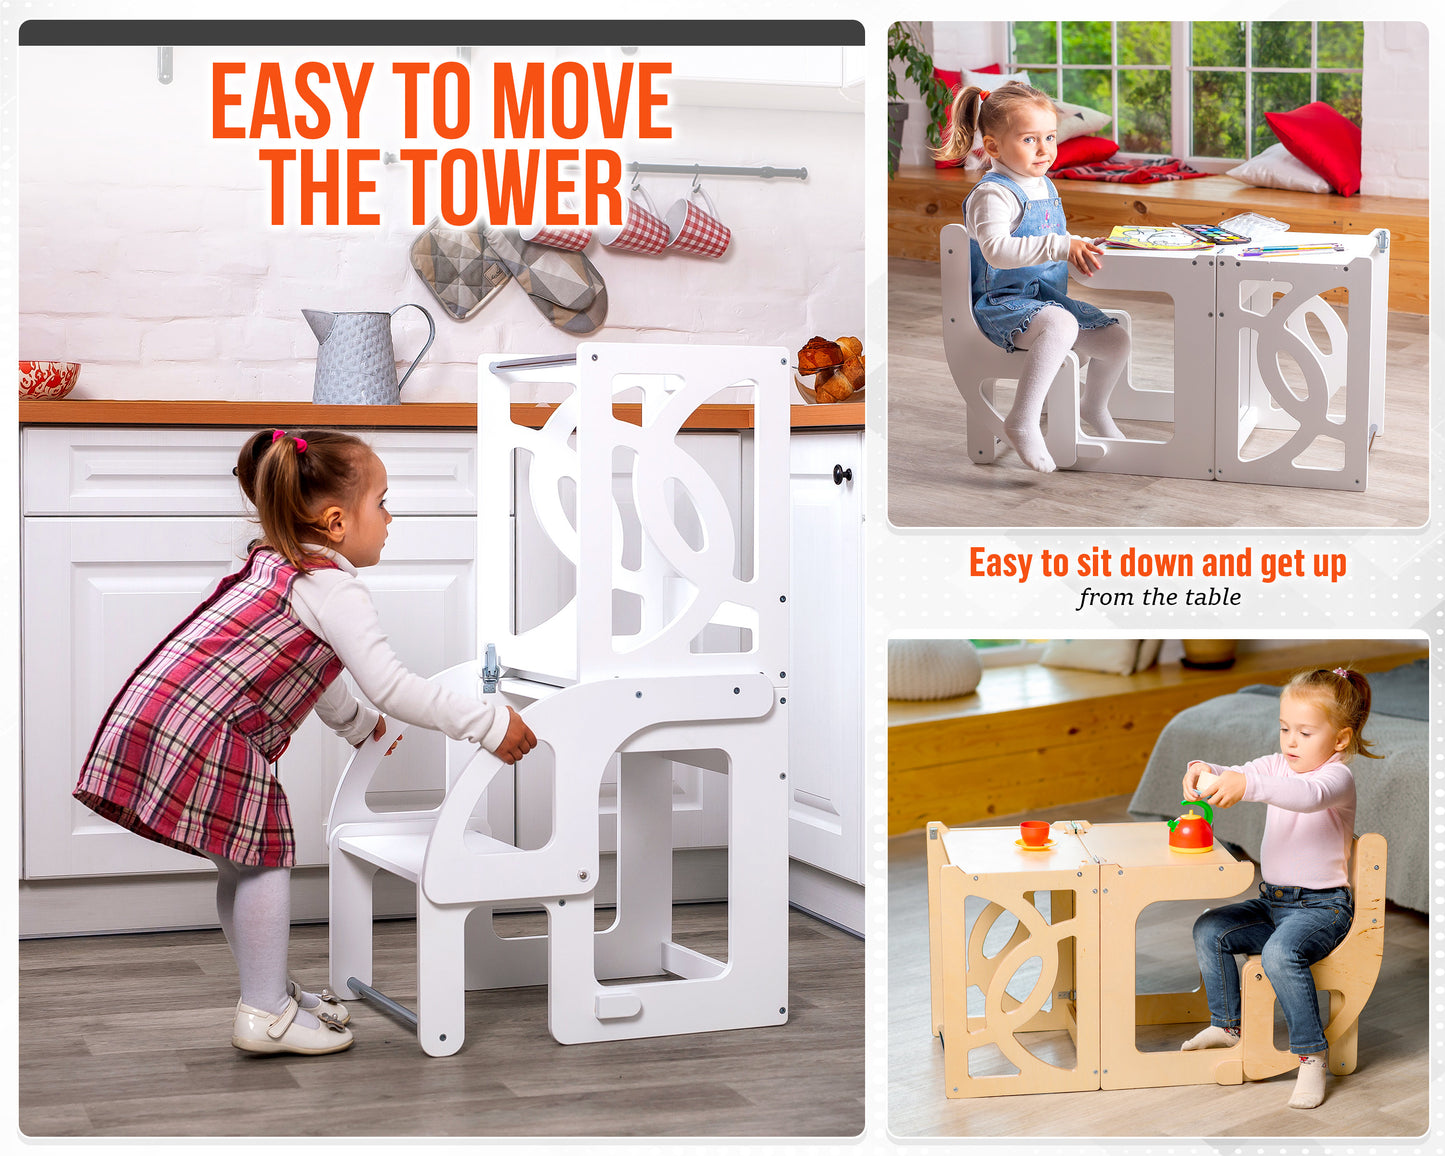 Black Convertible learning helper tower & table, montessori learning stool